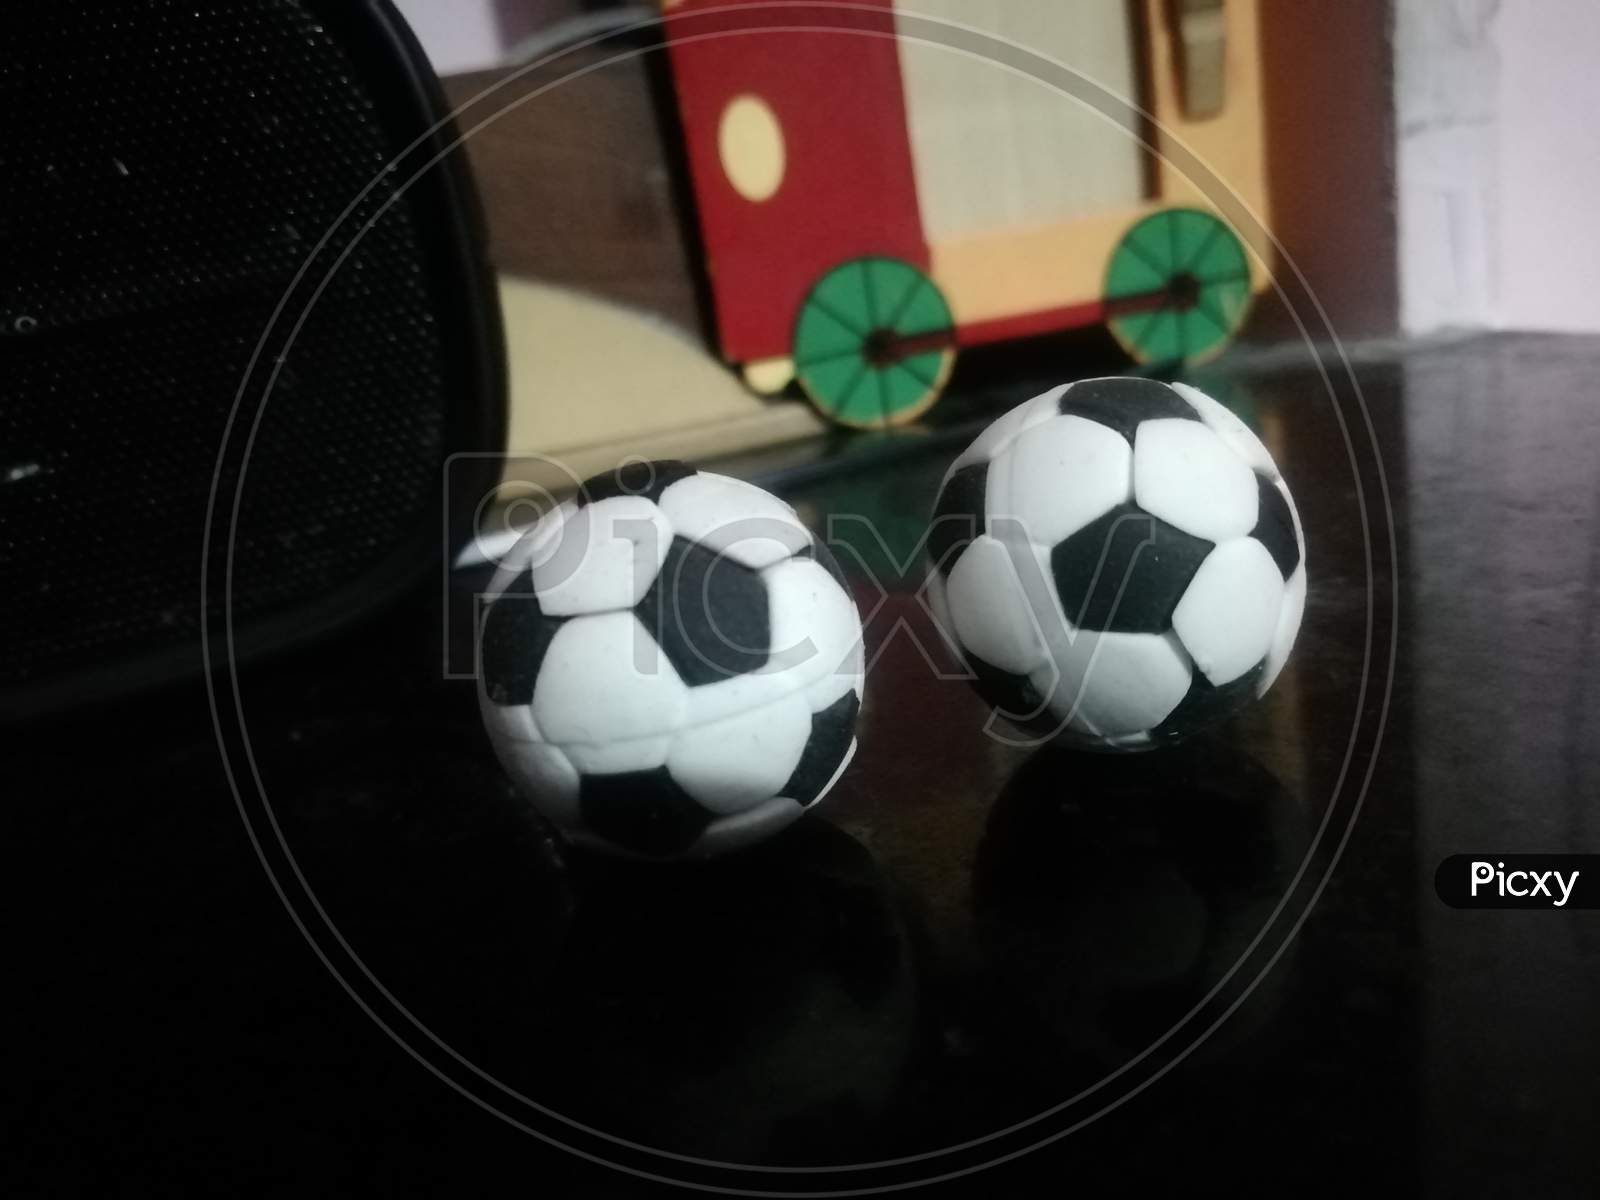 Black and white rubber balls for children playing